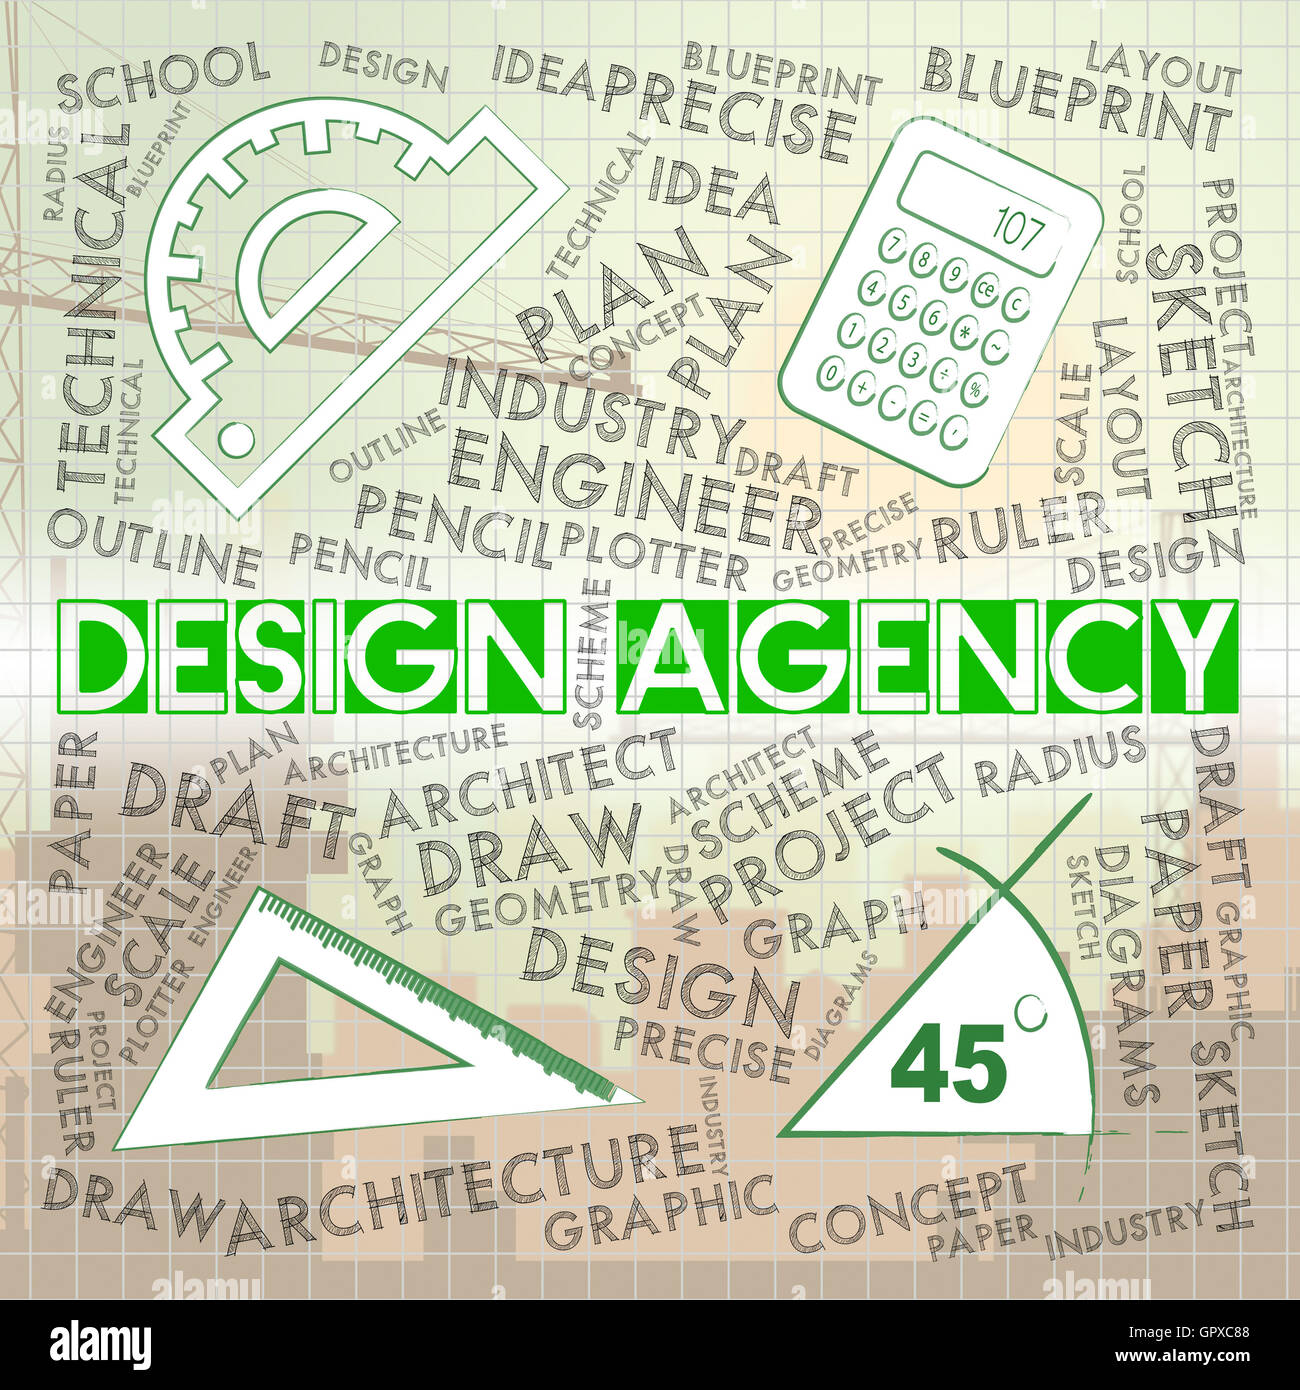 Design Agency Showing Graphic Office And Agent Stock Photo